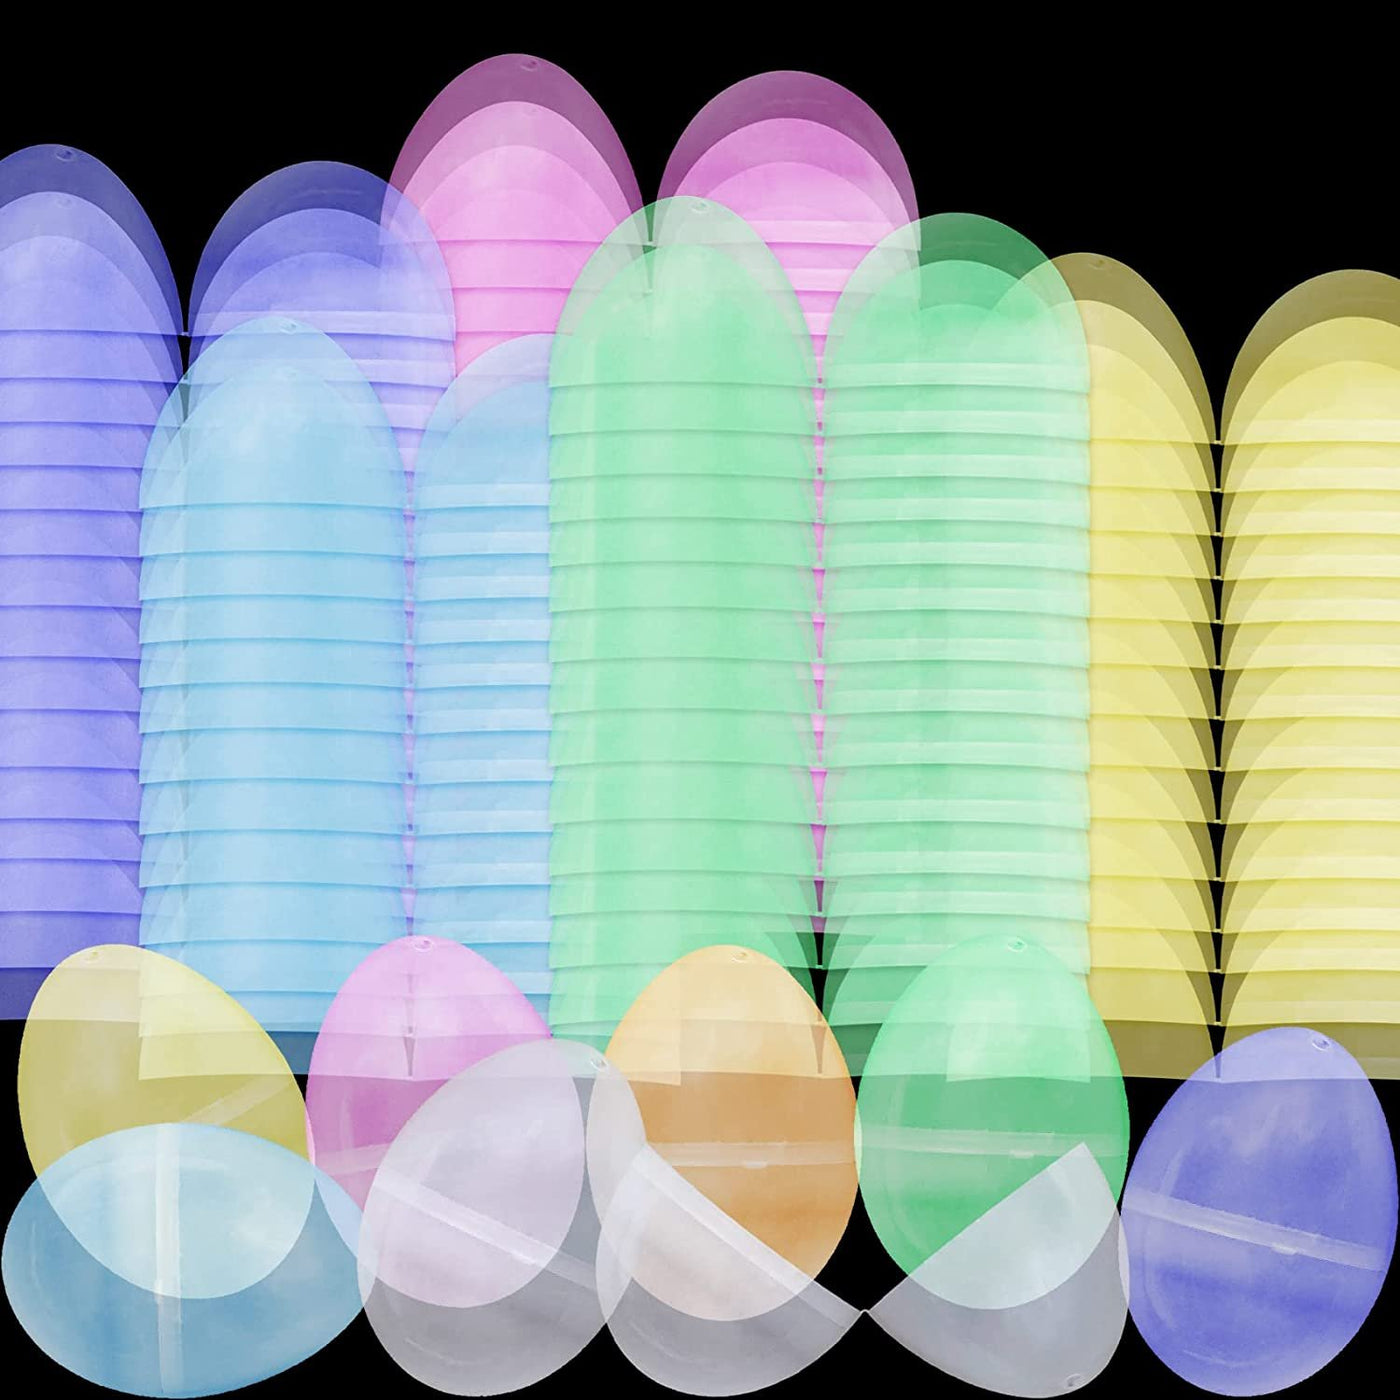 Glow in the Dark Easter Eggs, Bulk Pack of 100, Glowing 2.25" Empty Surprise Eggs for Toys and Candy, Unique Easter Egg Hunt Supplies, Easter Glow in the Dark Party Favors